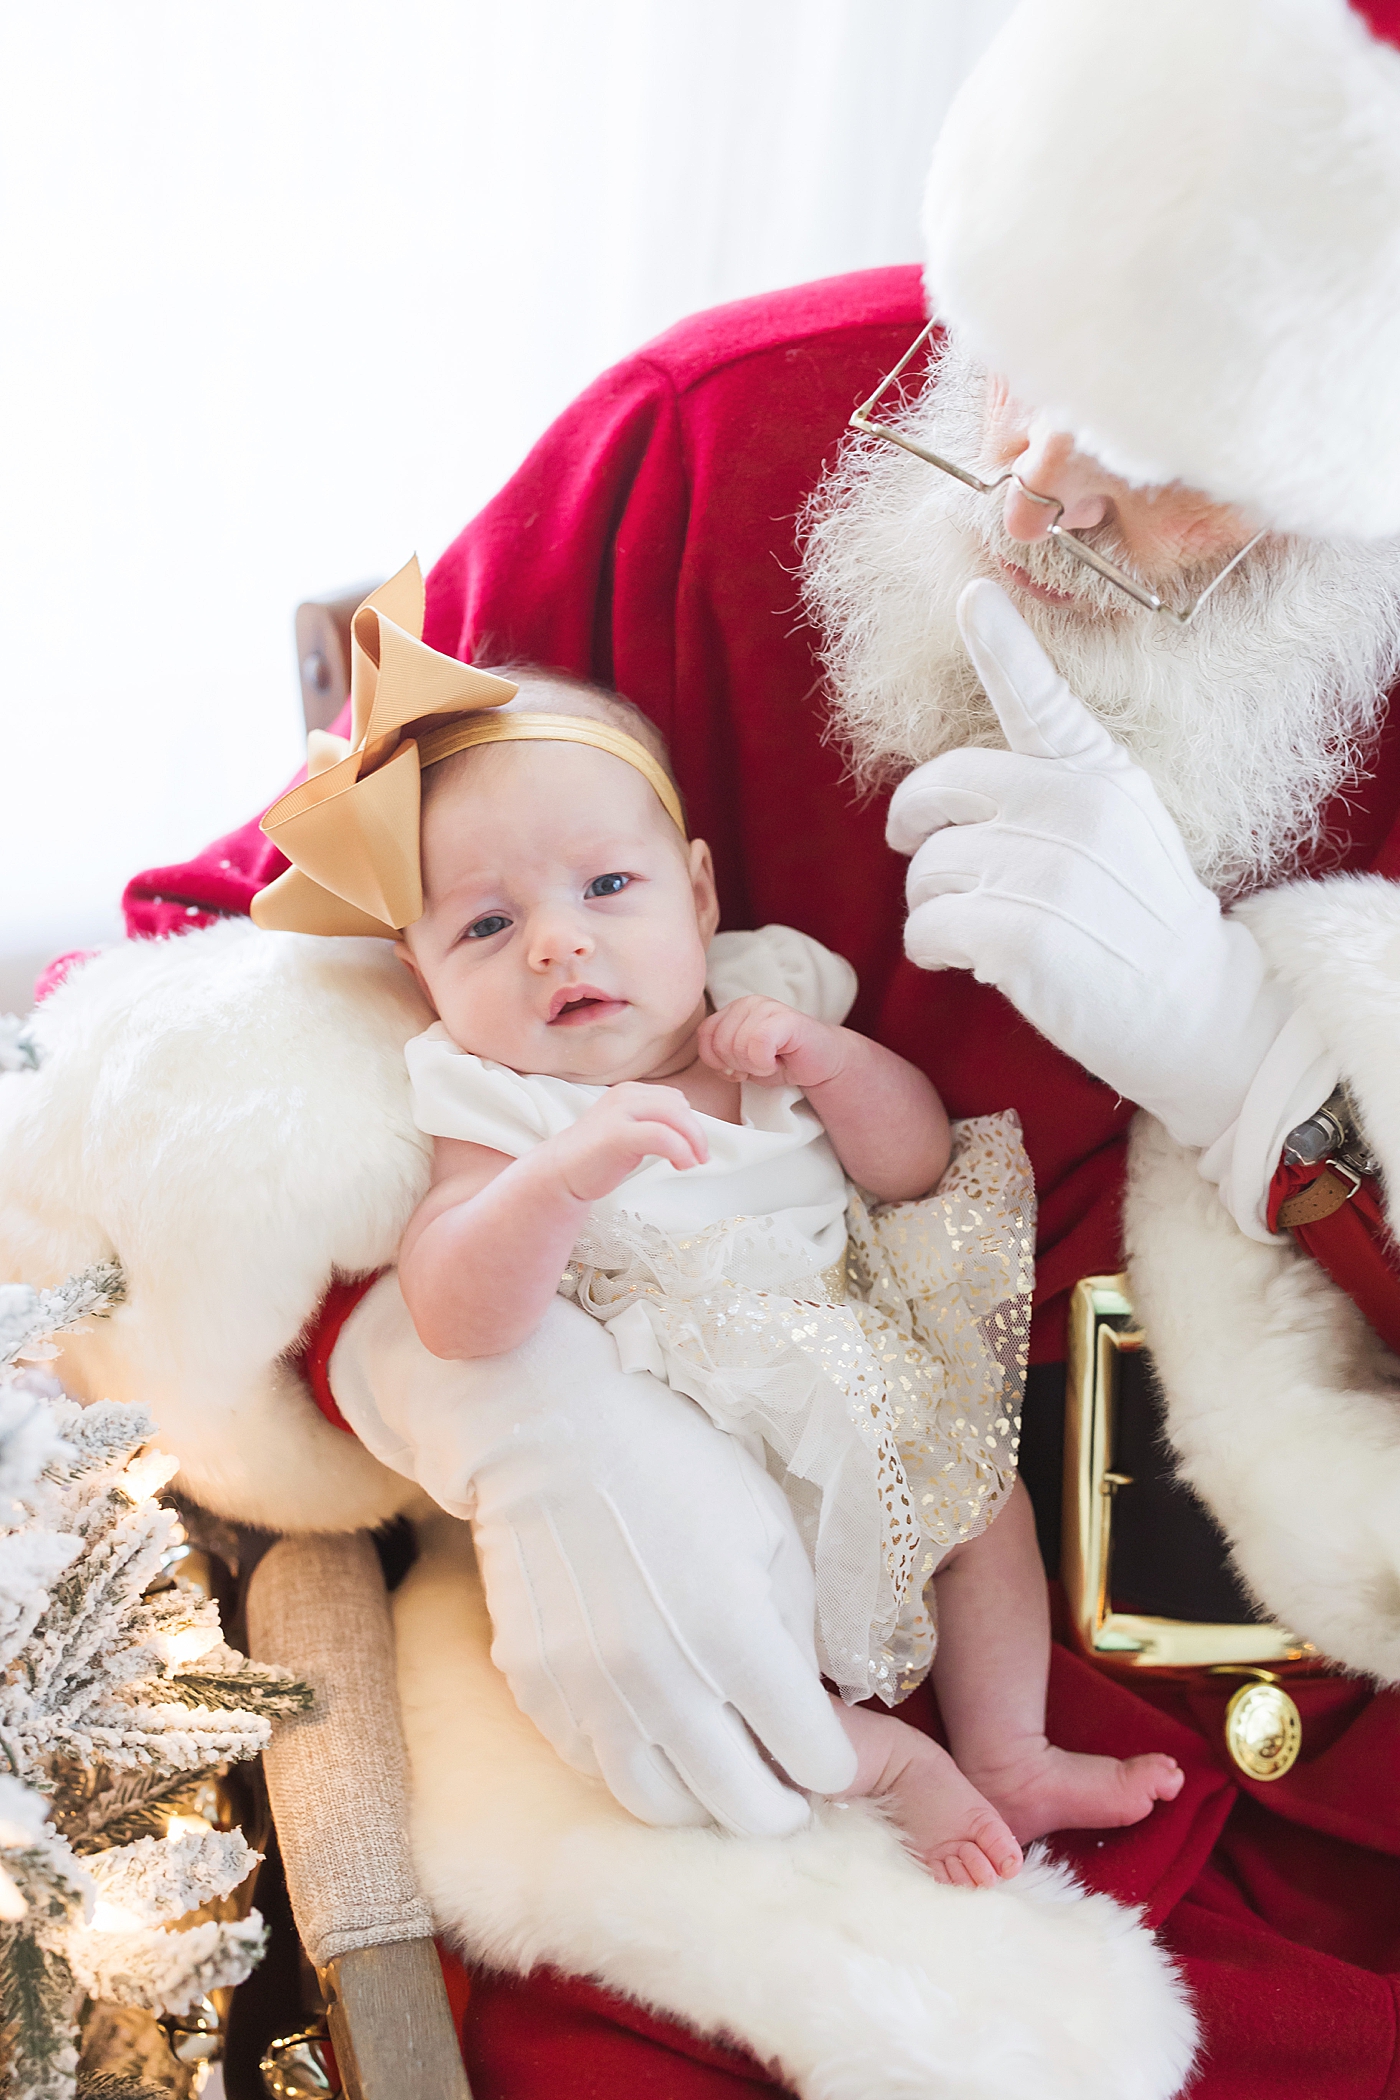 Baby girl's first Christmas. Photo by Fresh Light Photography.